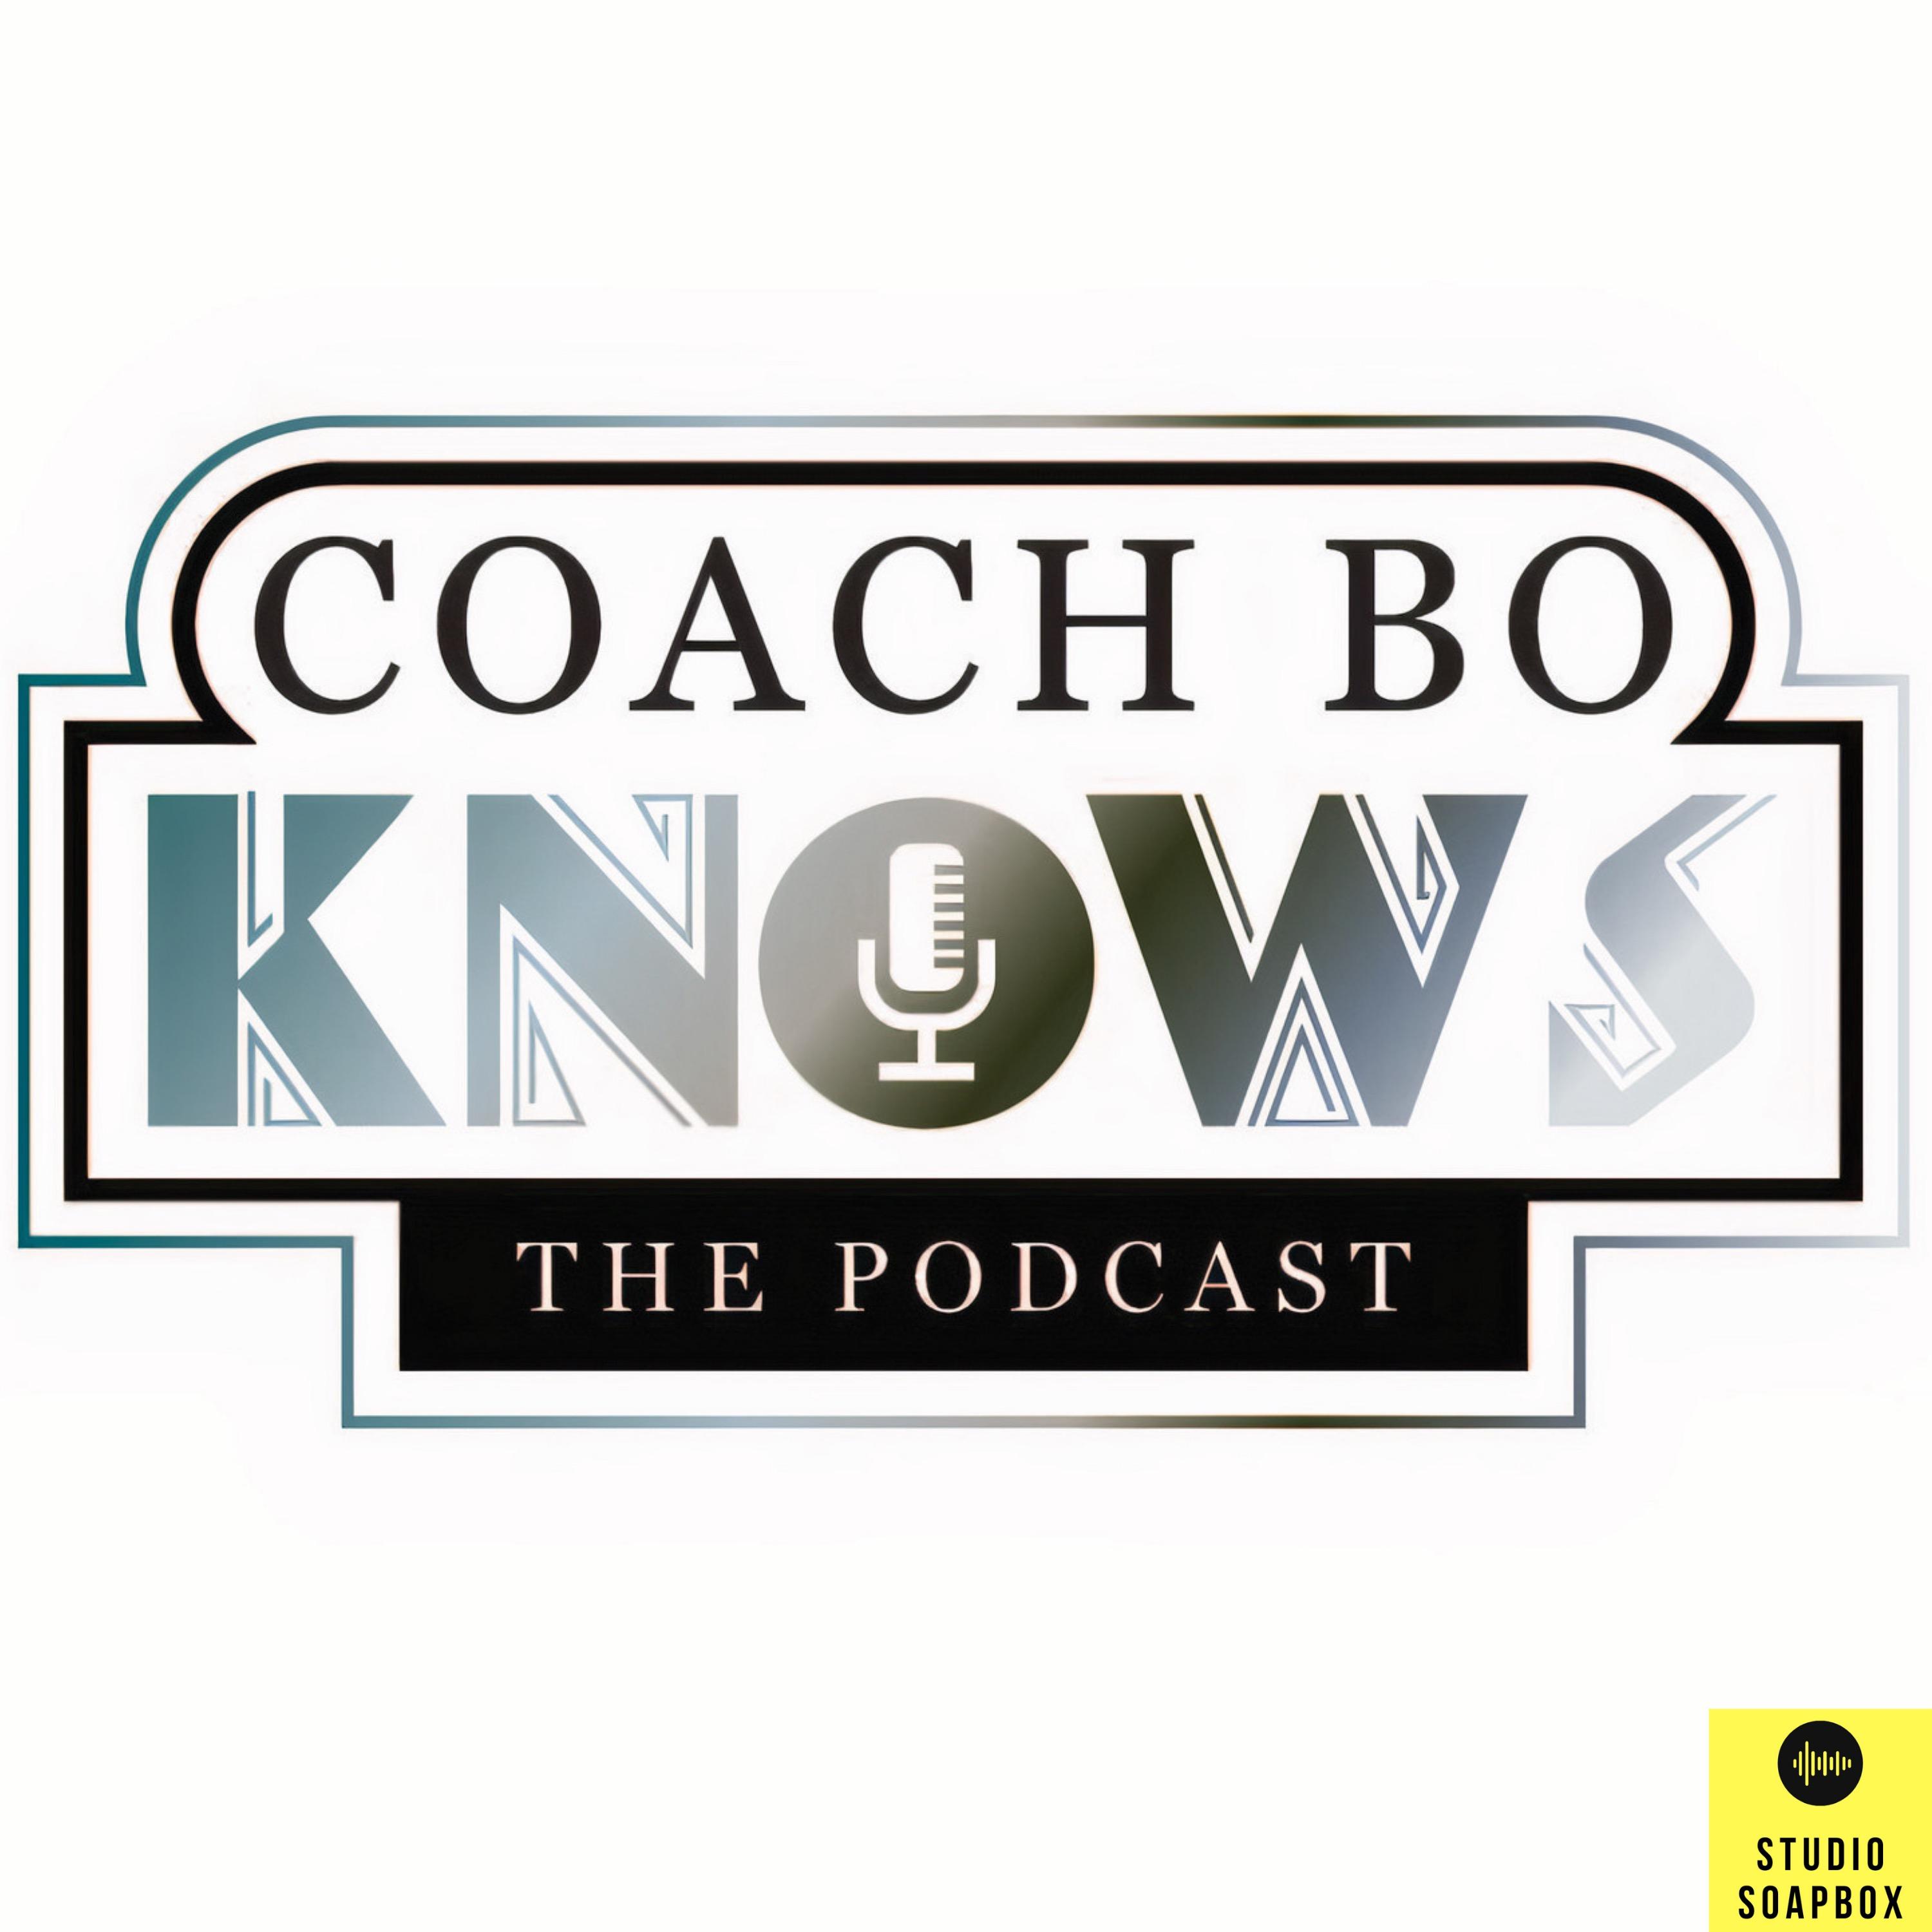 The Coach Bo Knows Podcast